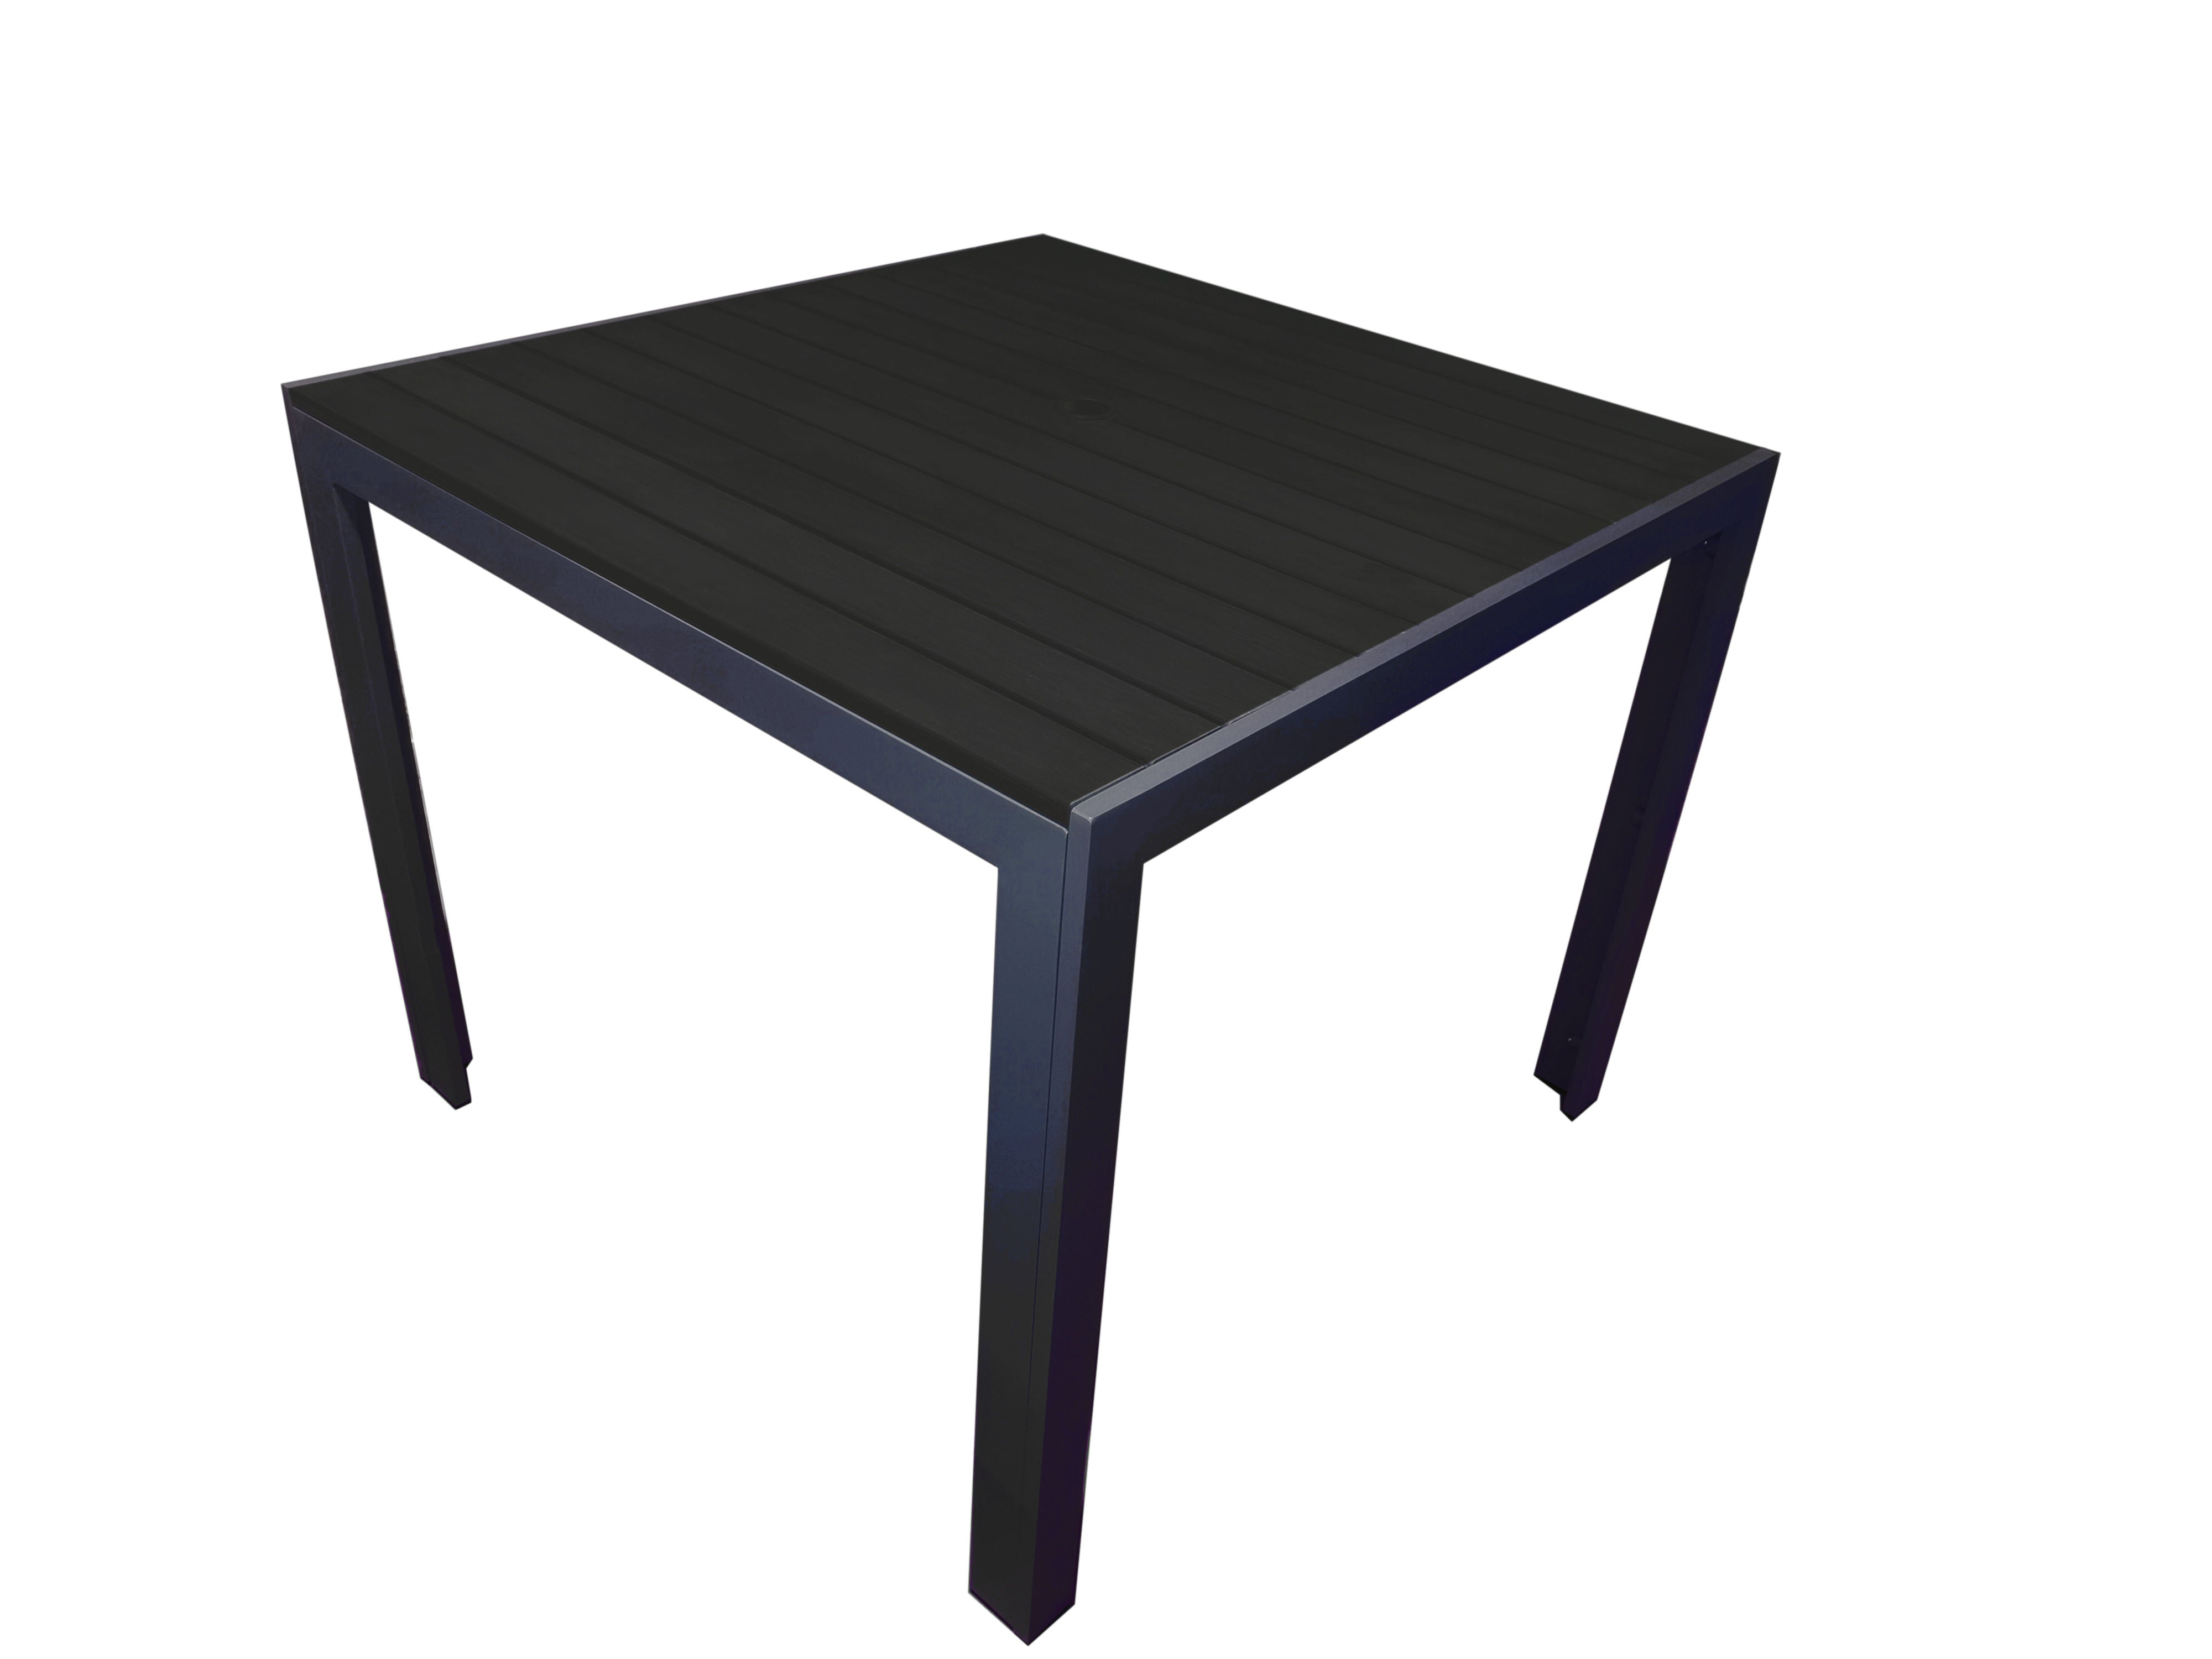 PatioZone Square Condo Table with Polywood Slats Tabletop w/ Umbrella Hole and Aluminum Frame (MOSS-T302C) - Matte Charcoal